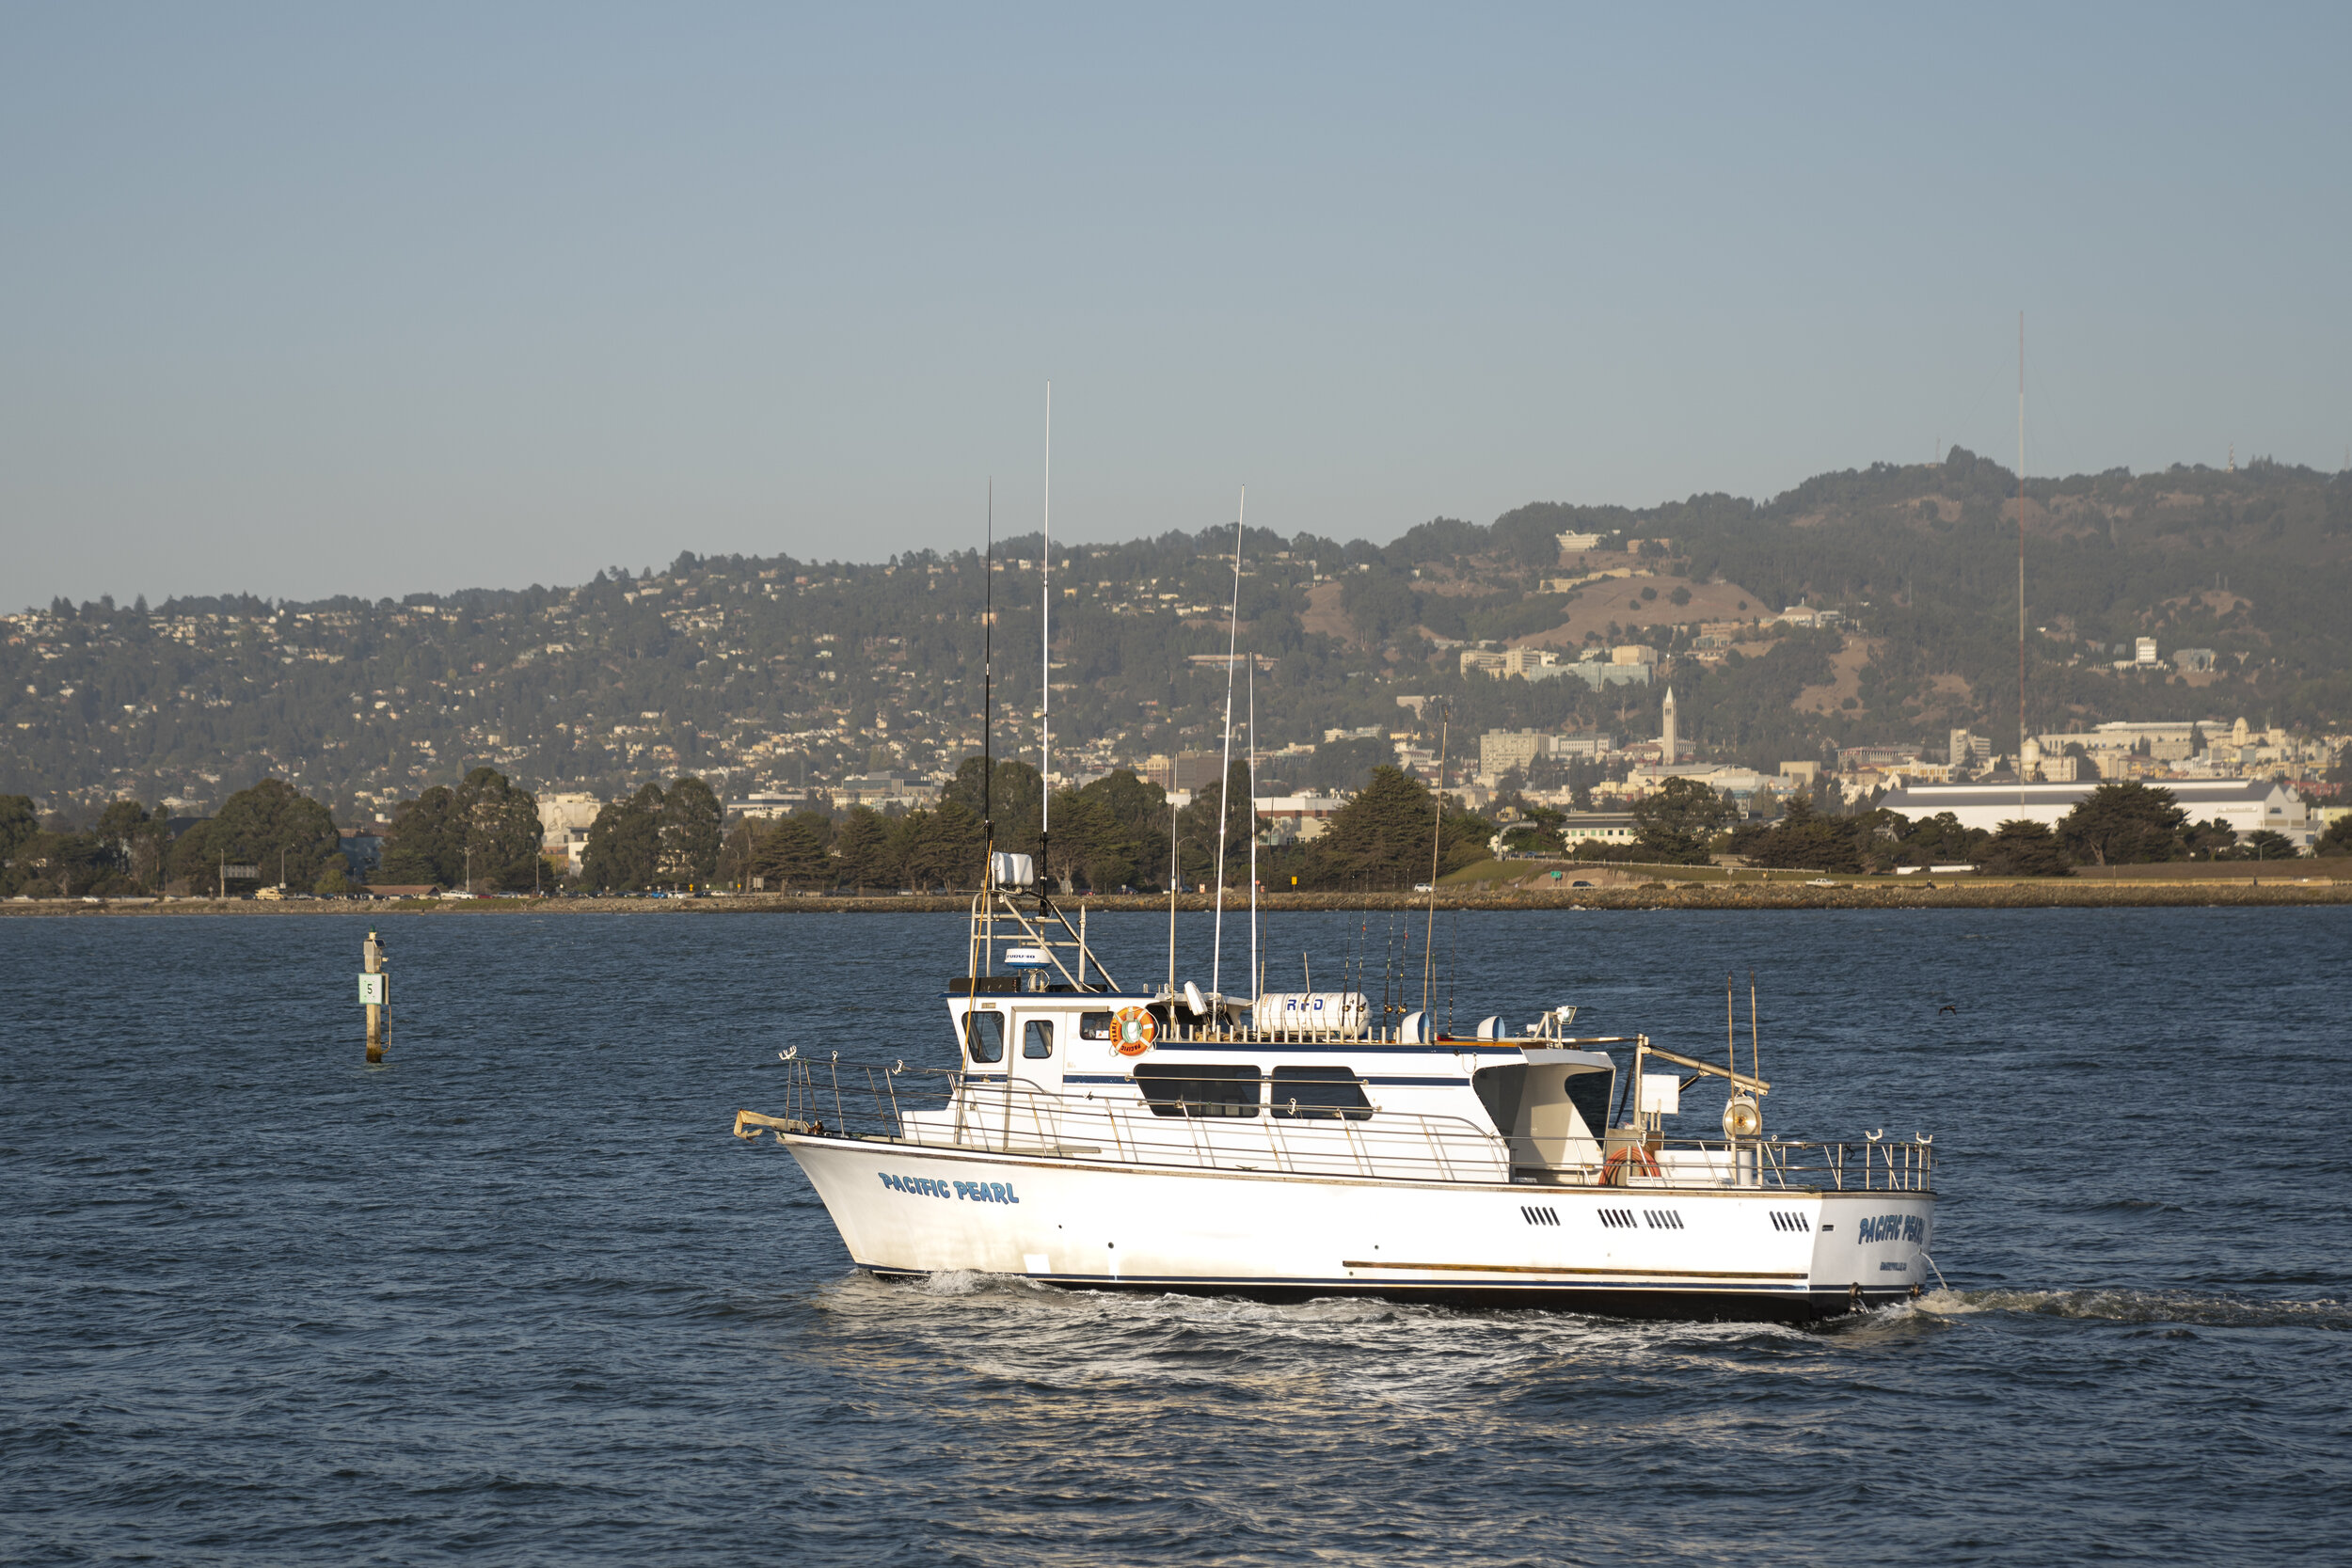 PacificPearlCharters_1635.jpg